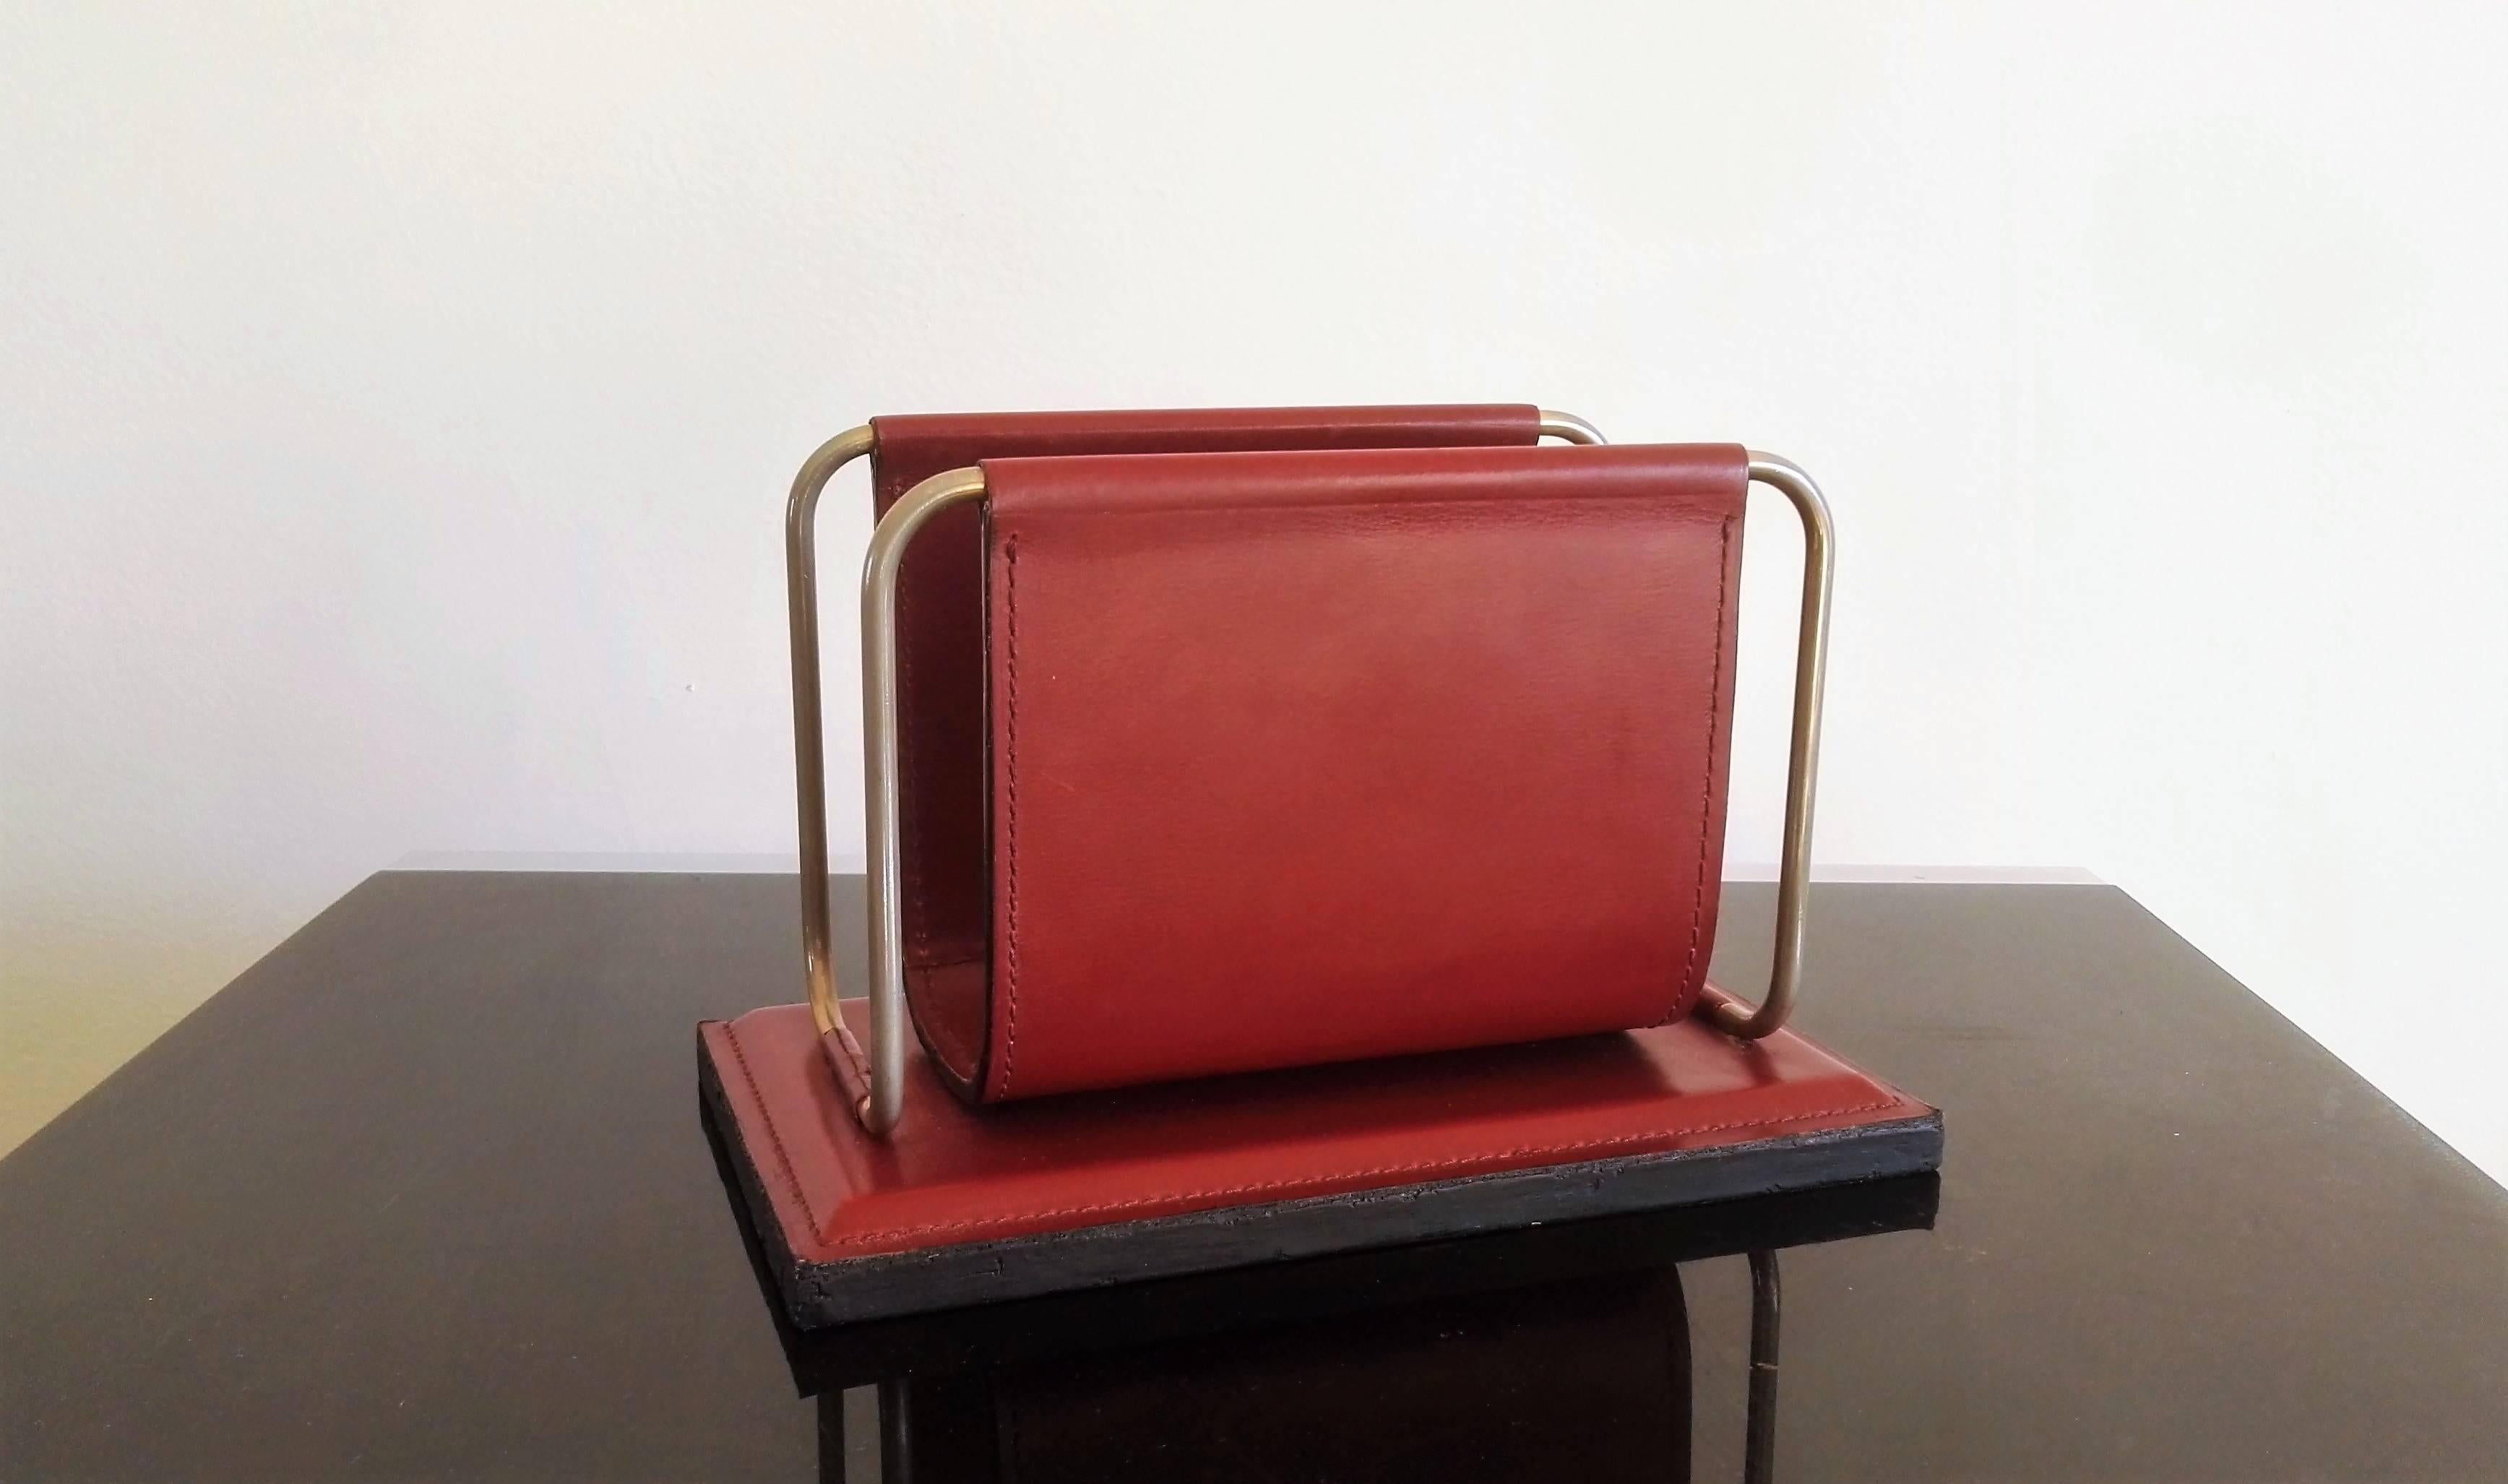 French Stitched Bordeaux Leather Letter Rack by Longchamp, France, 1970s